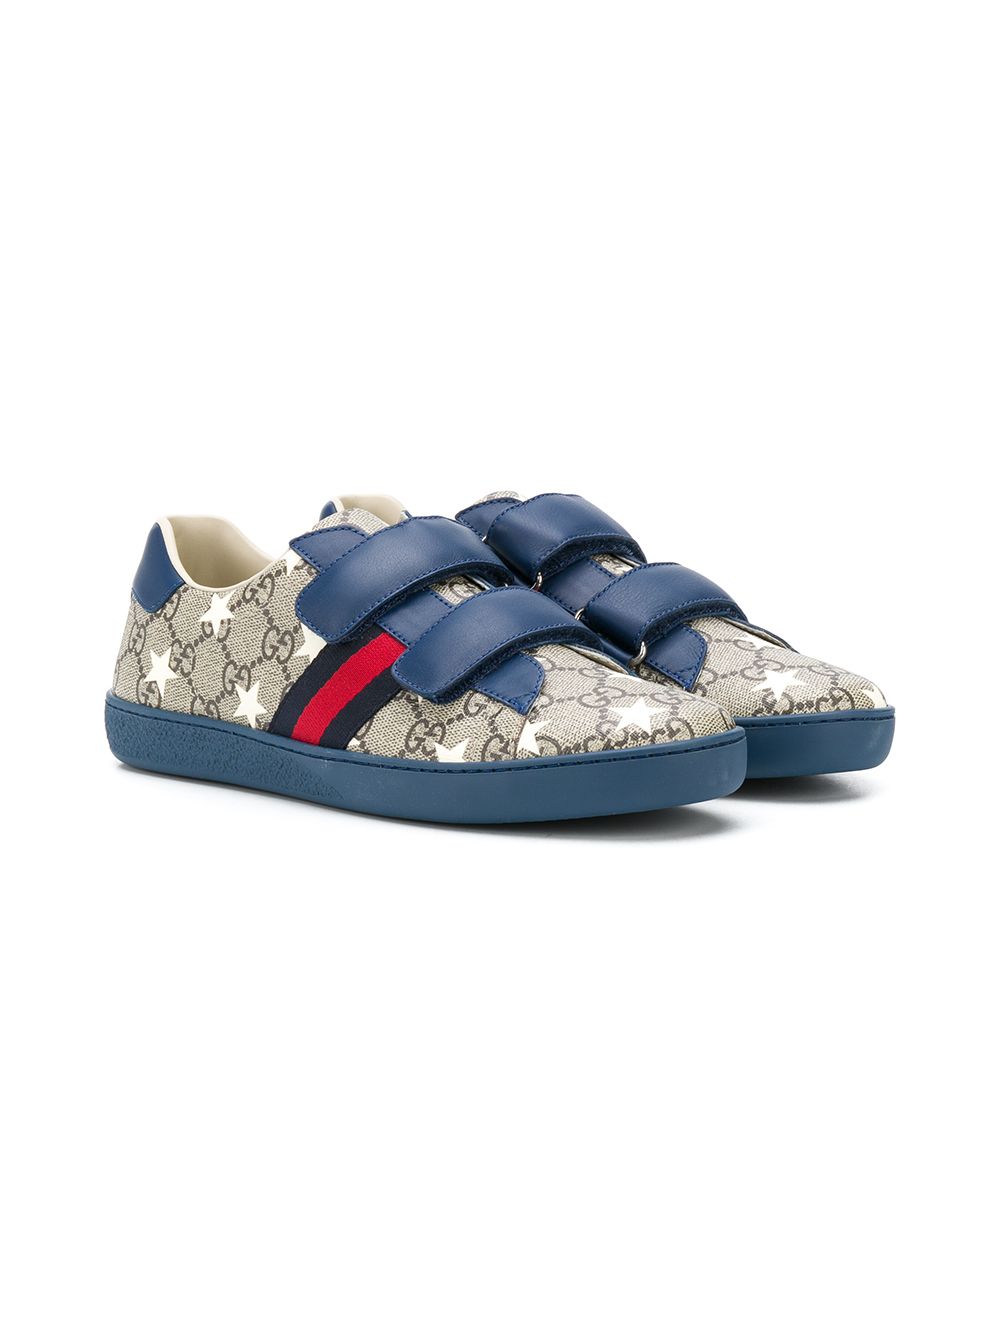 GUCCI TEEN ACE GG STARS SNEAKERS